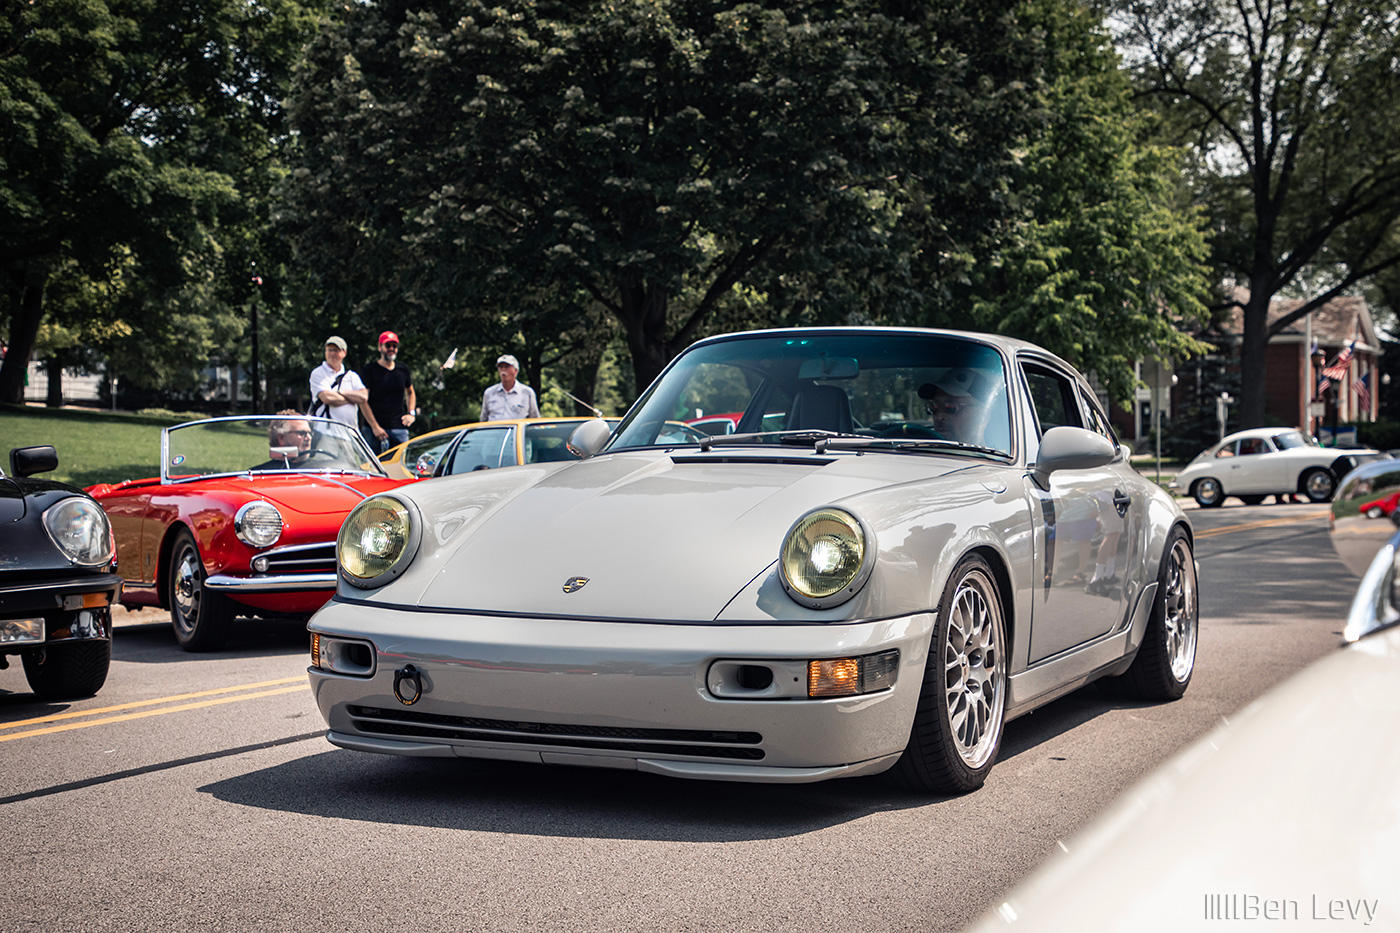 Grey Porsche 964 at Fuelfed Coffee & Classics in Hinsdale